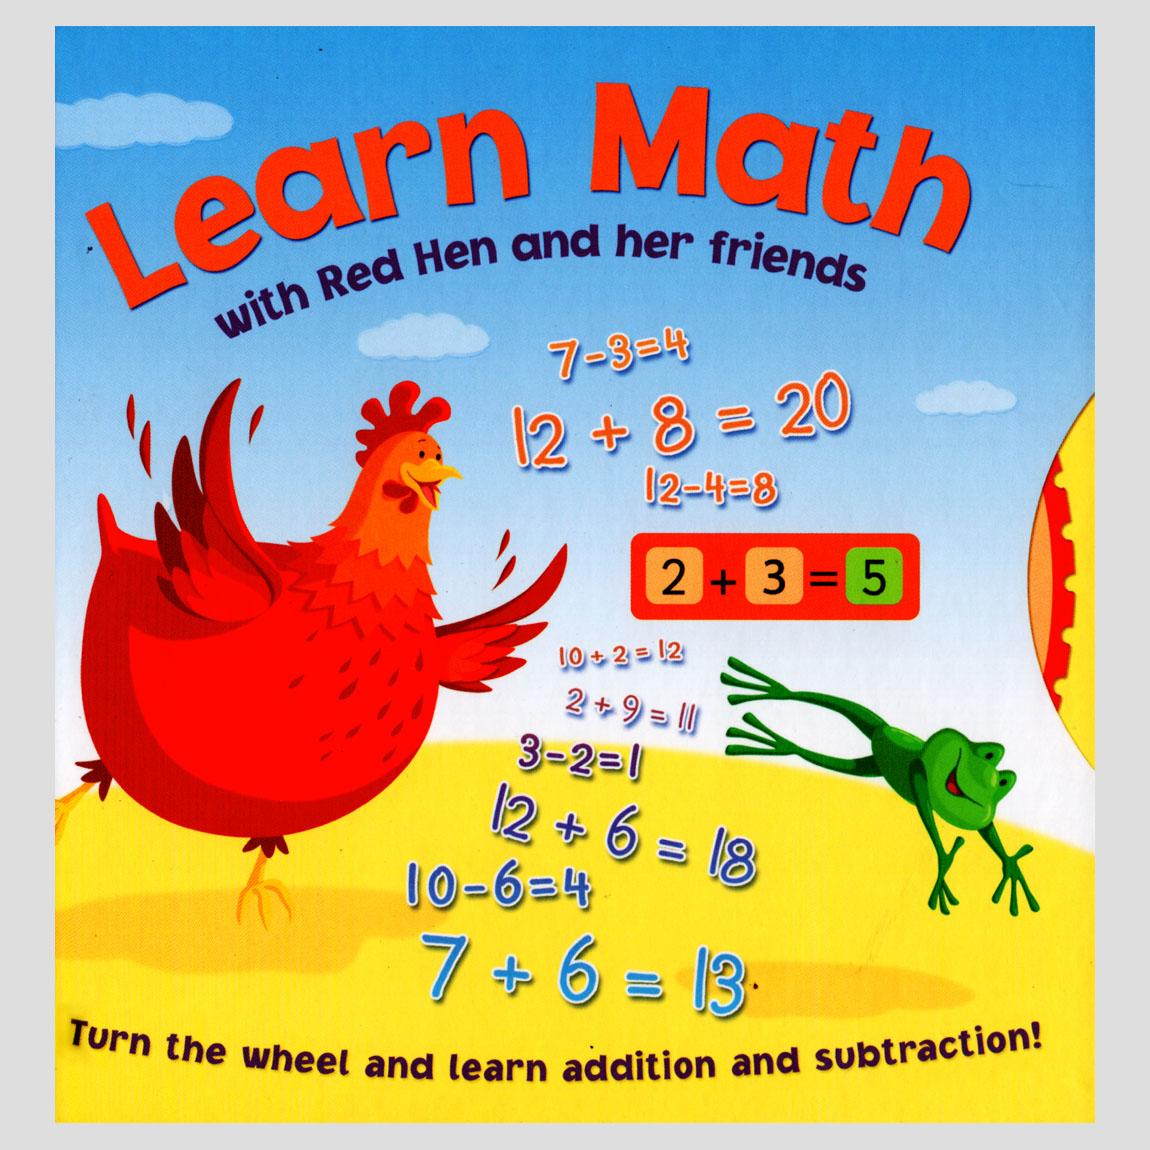 Learn Math with Red Hen and her friends หนังสือสอนเลข